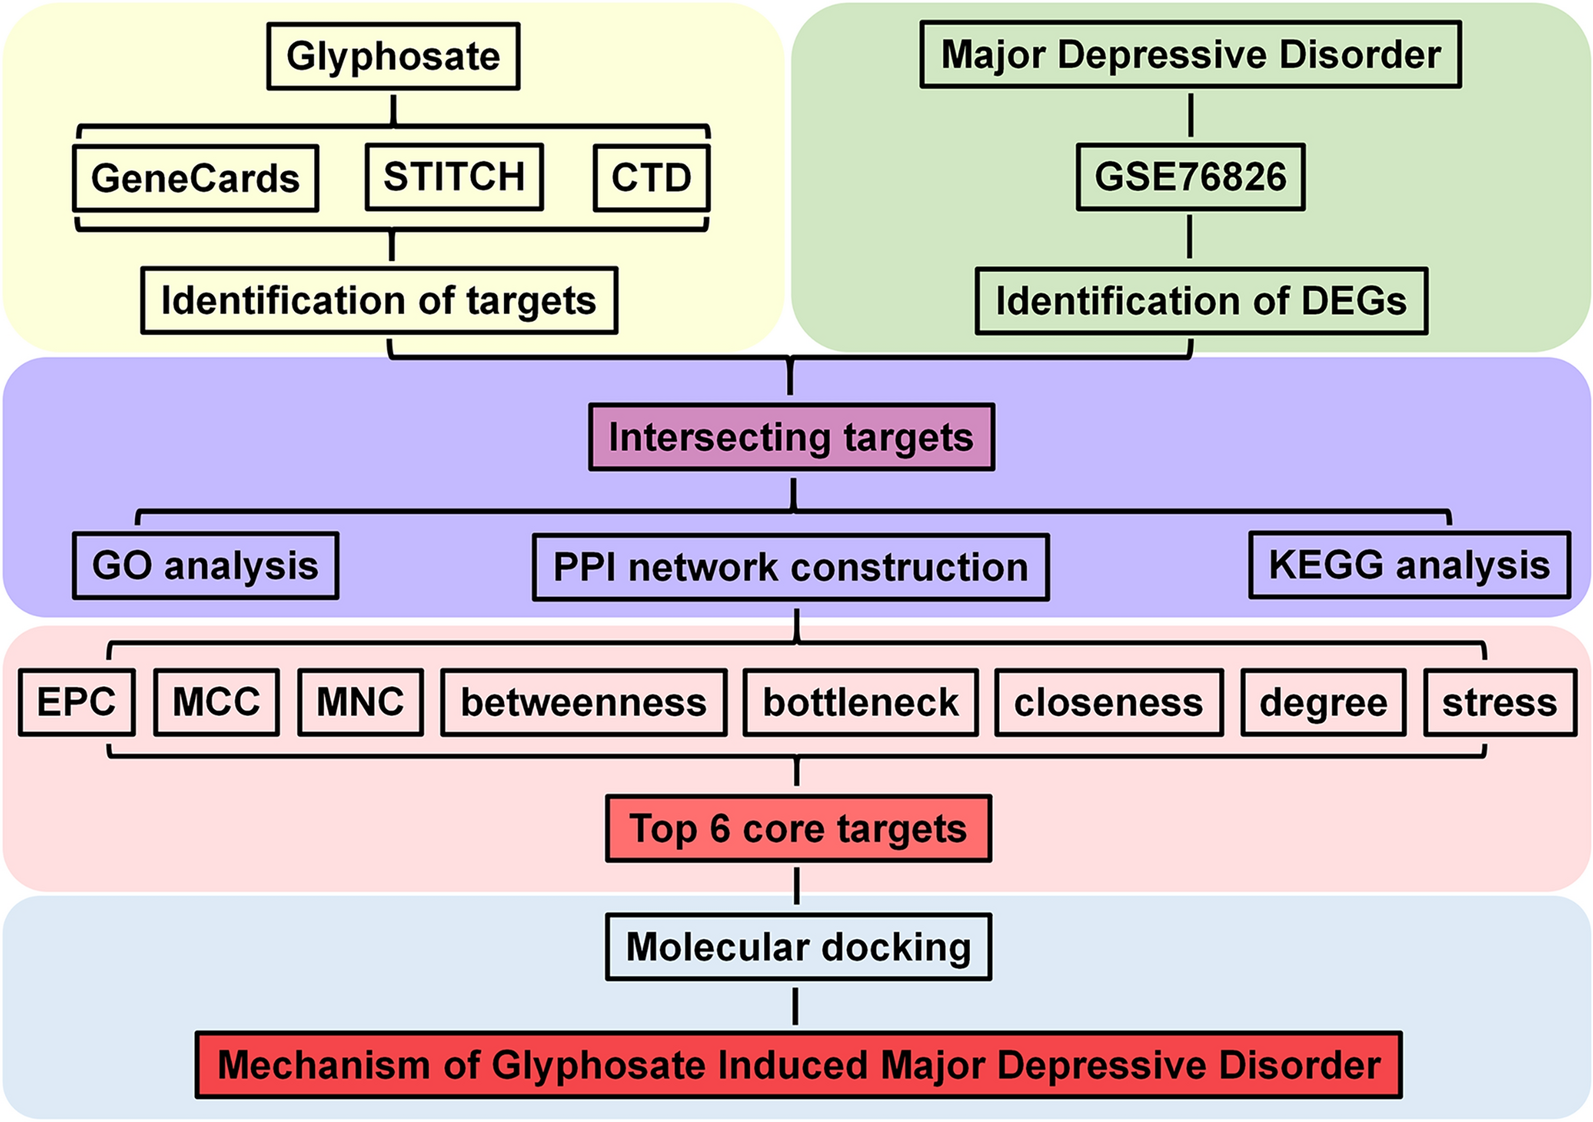 Clarification of the molecular mechanisms underlying glyphosate-induced major depressive disorder: a network toxicology approach